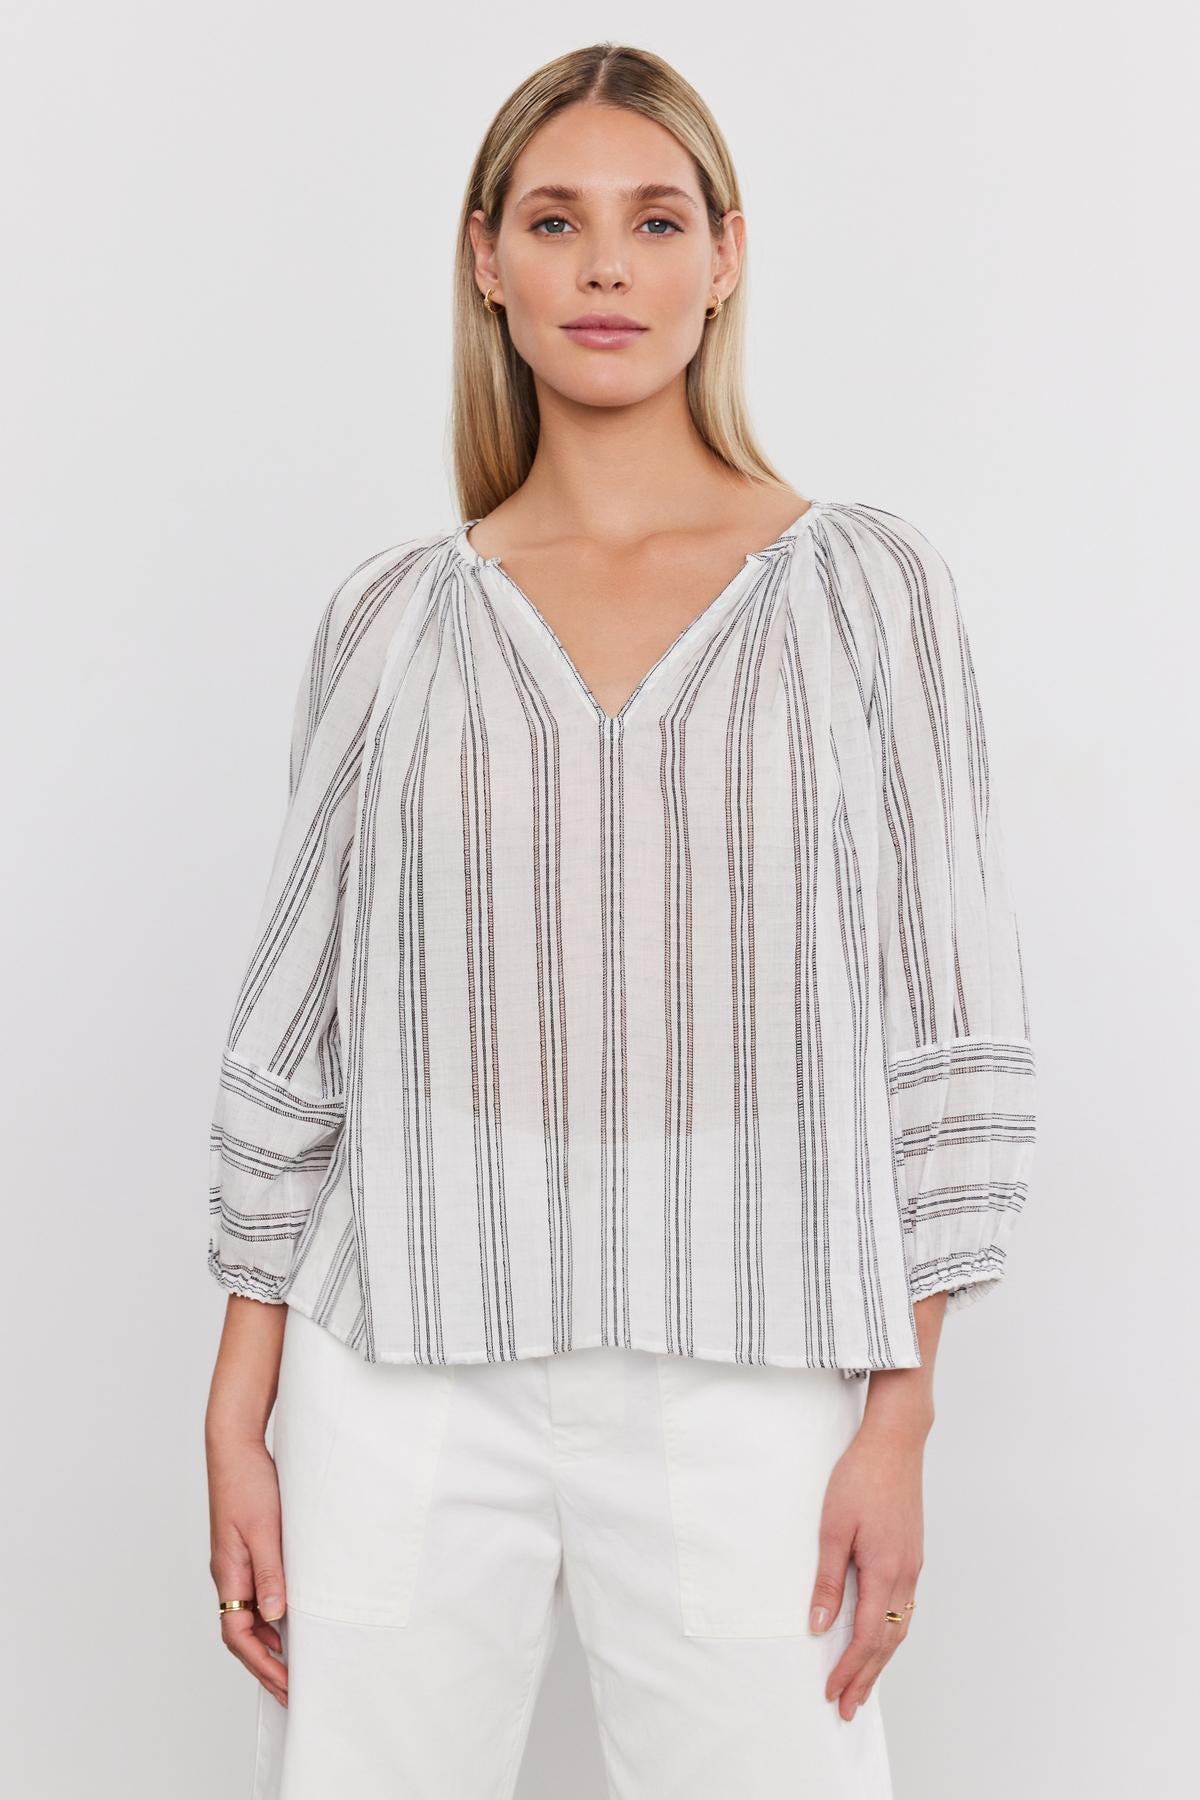   Woman wearing a Velvet by Graham & Spencer Gianna top, a striped v-neckline blouse with three-quarter sleeves, paired with white pants, standing against a white background. 